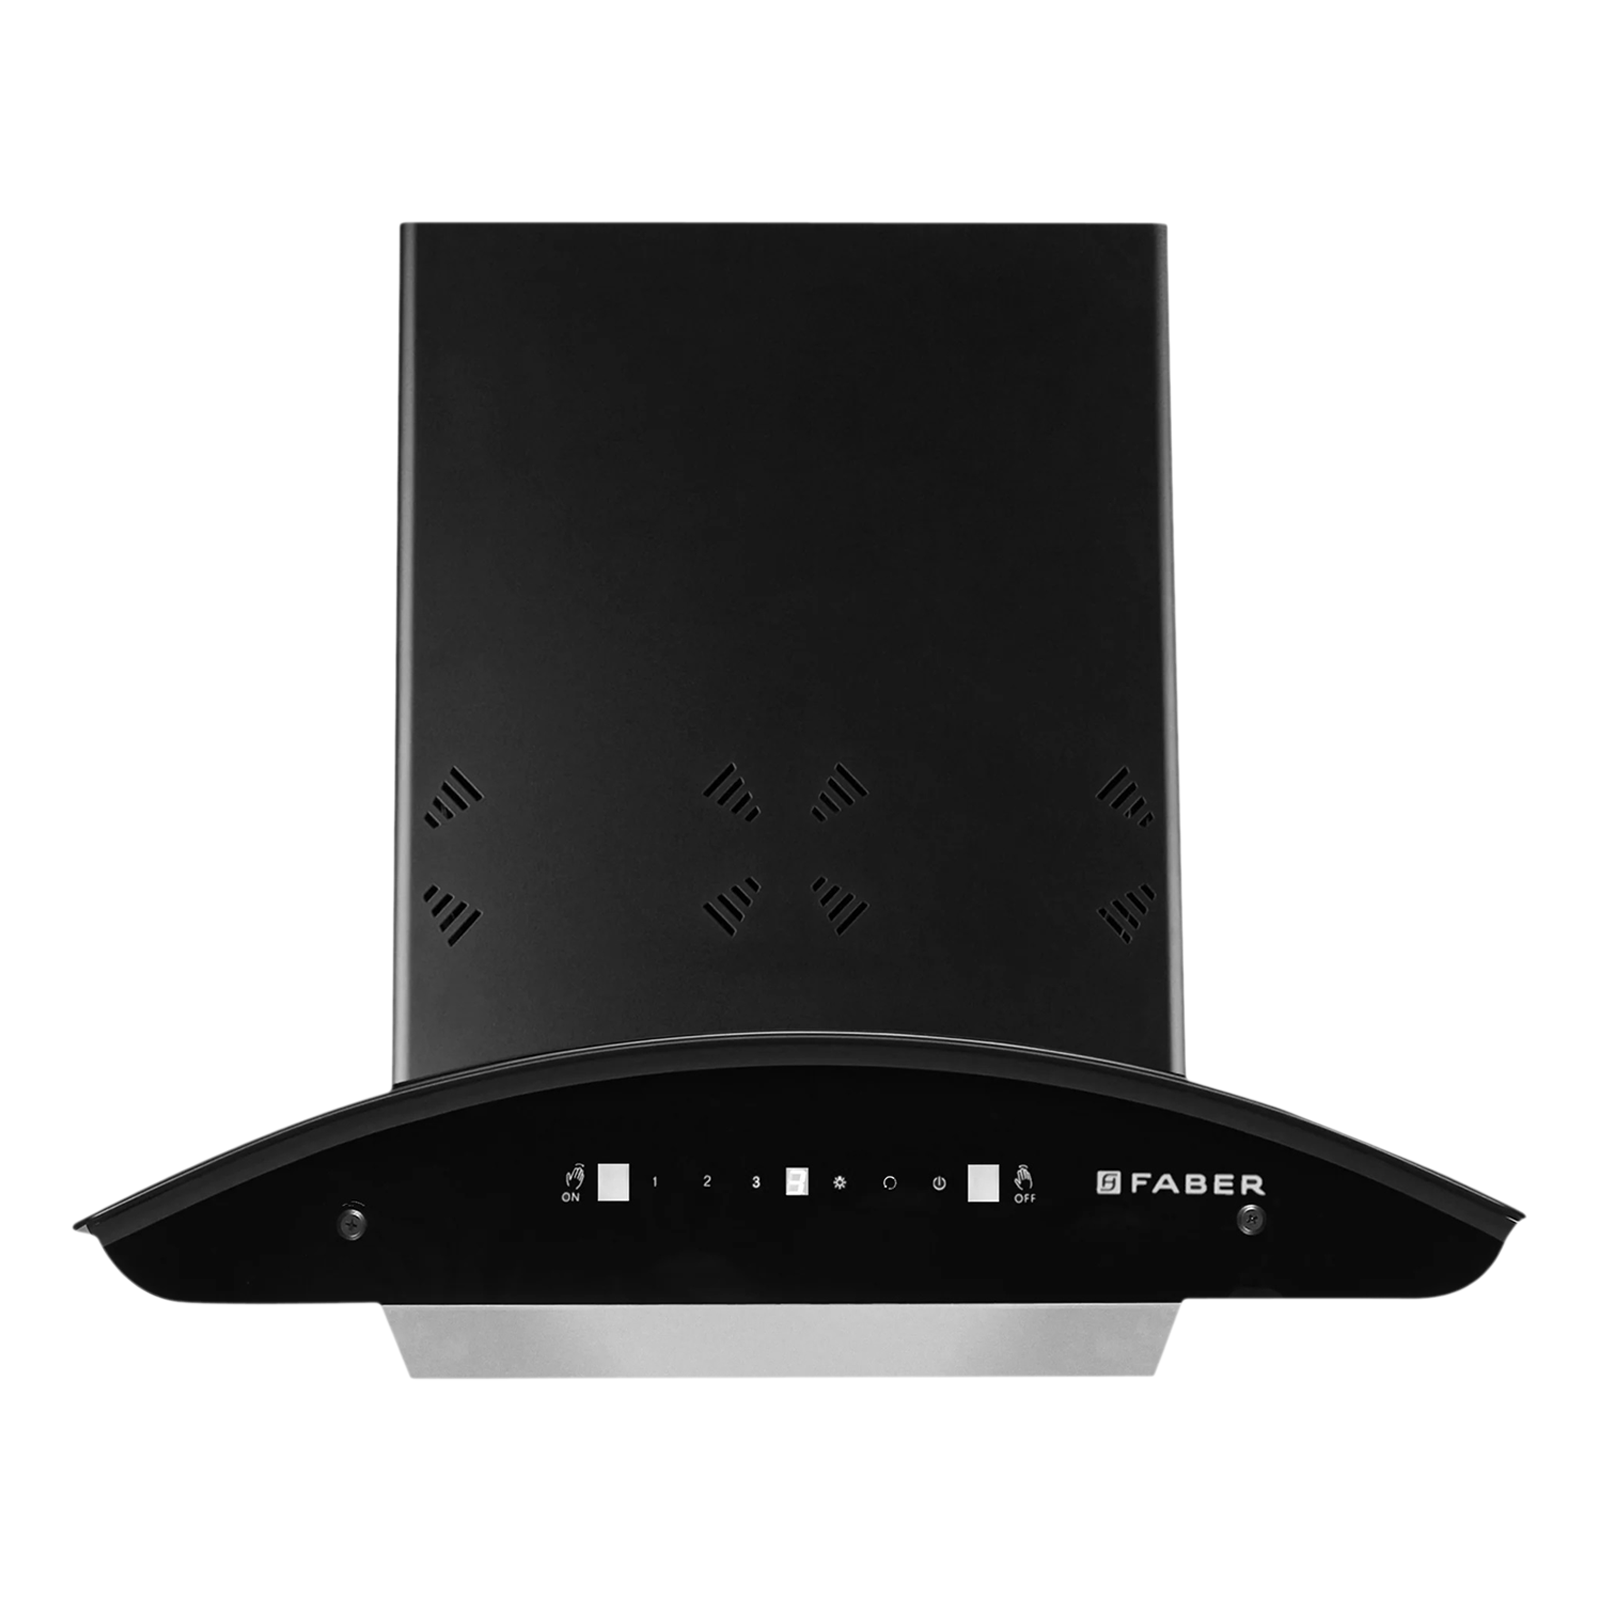 FABER Ellora 3D 60cm 1400m3/hr Ducted Auto Clean Wall Mounted Chimney with Baffle Filter (Black)